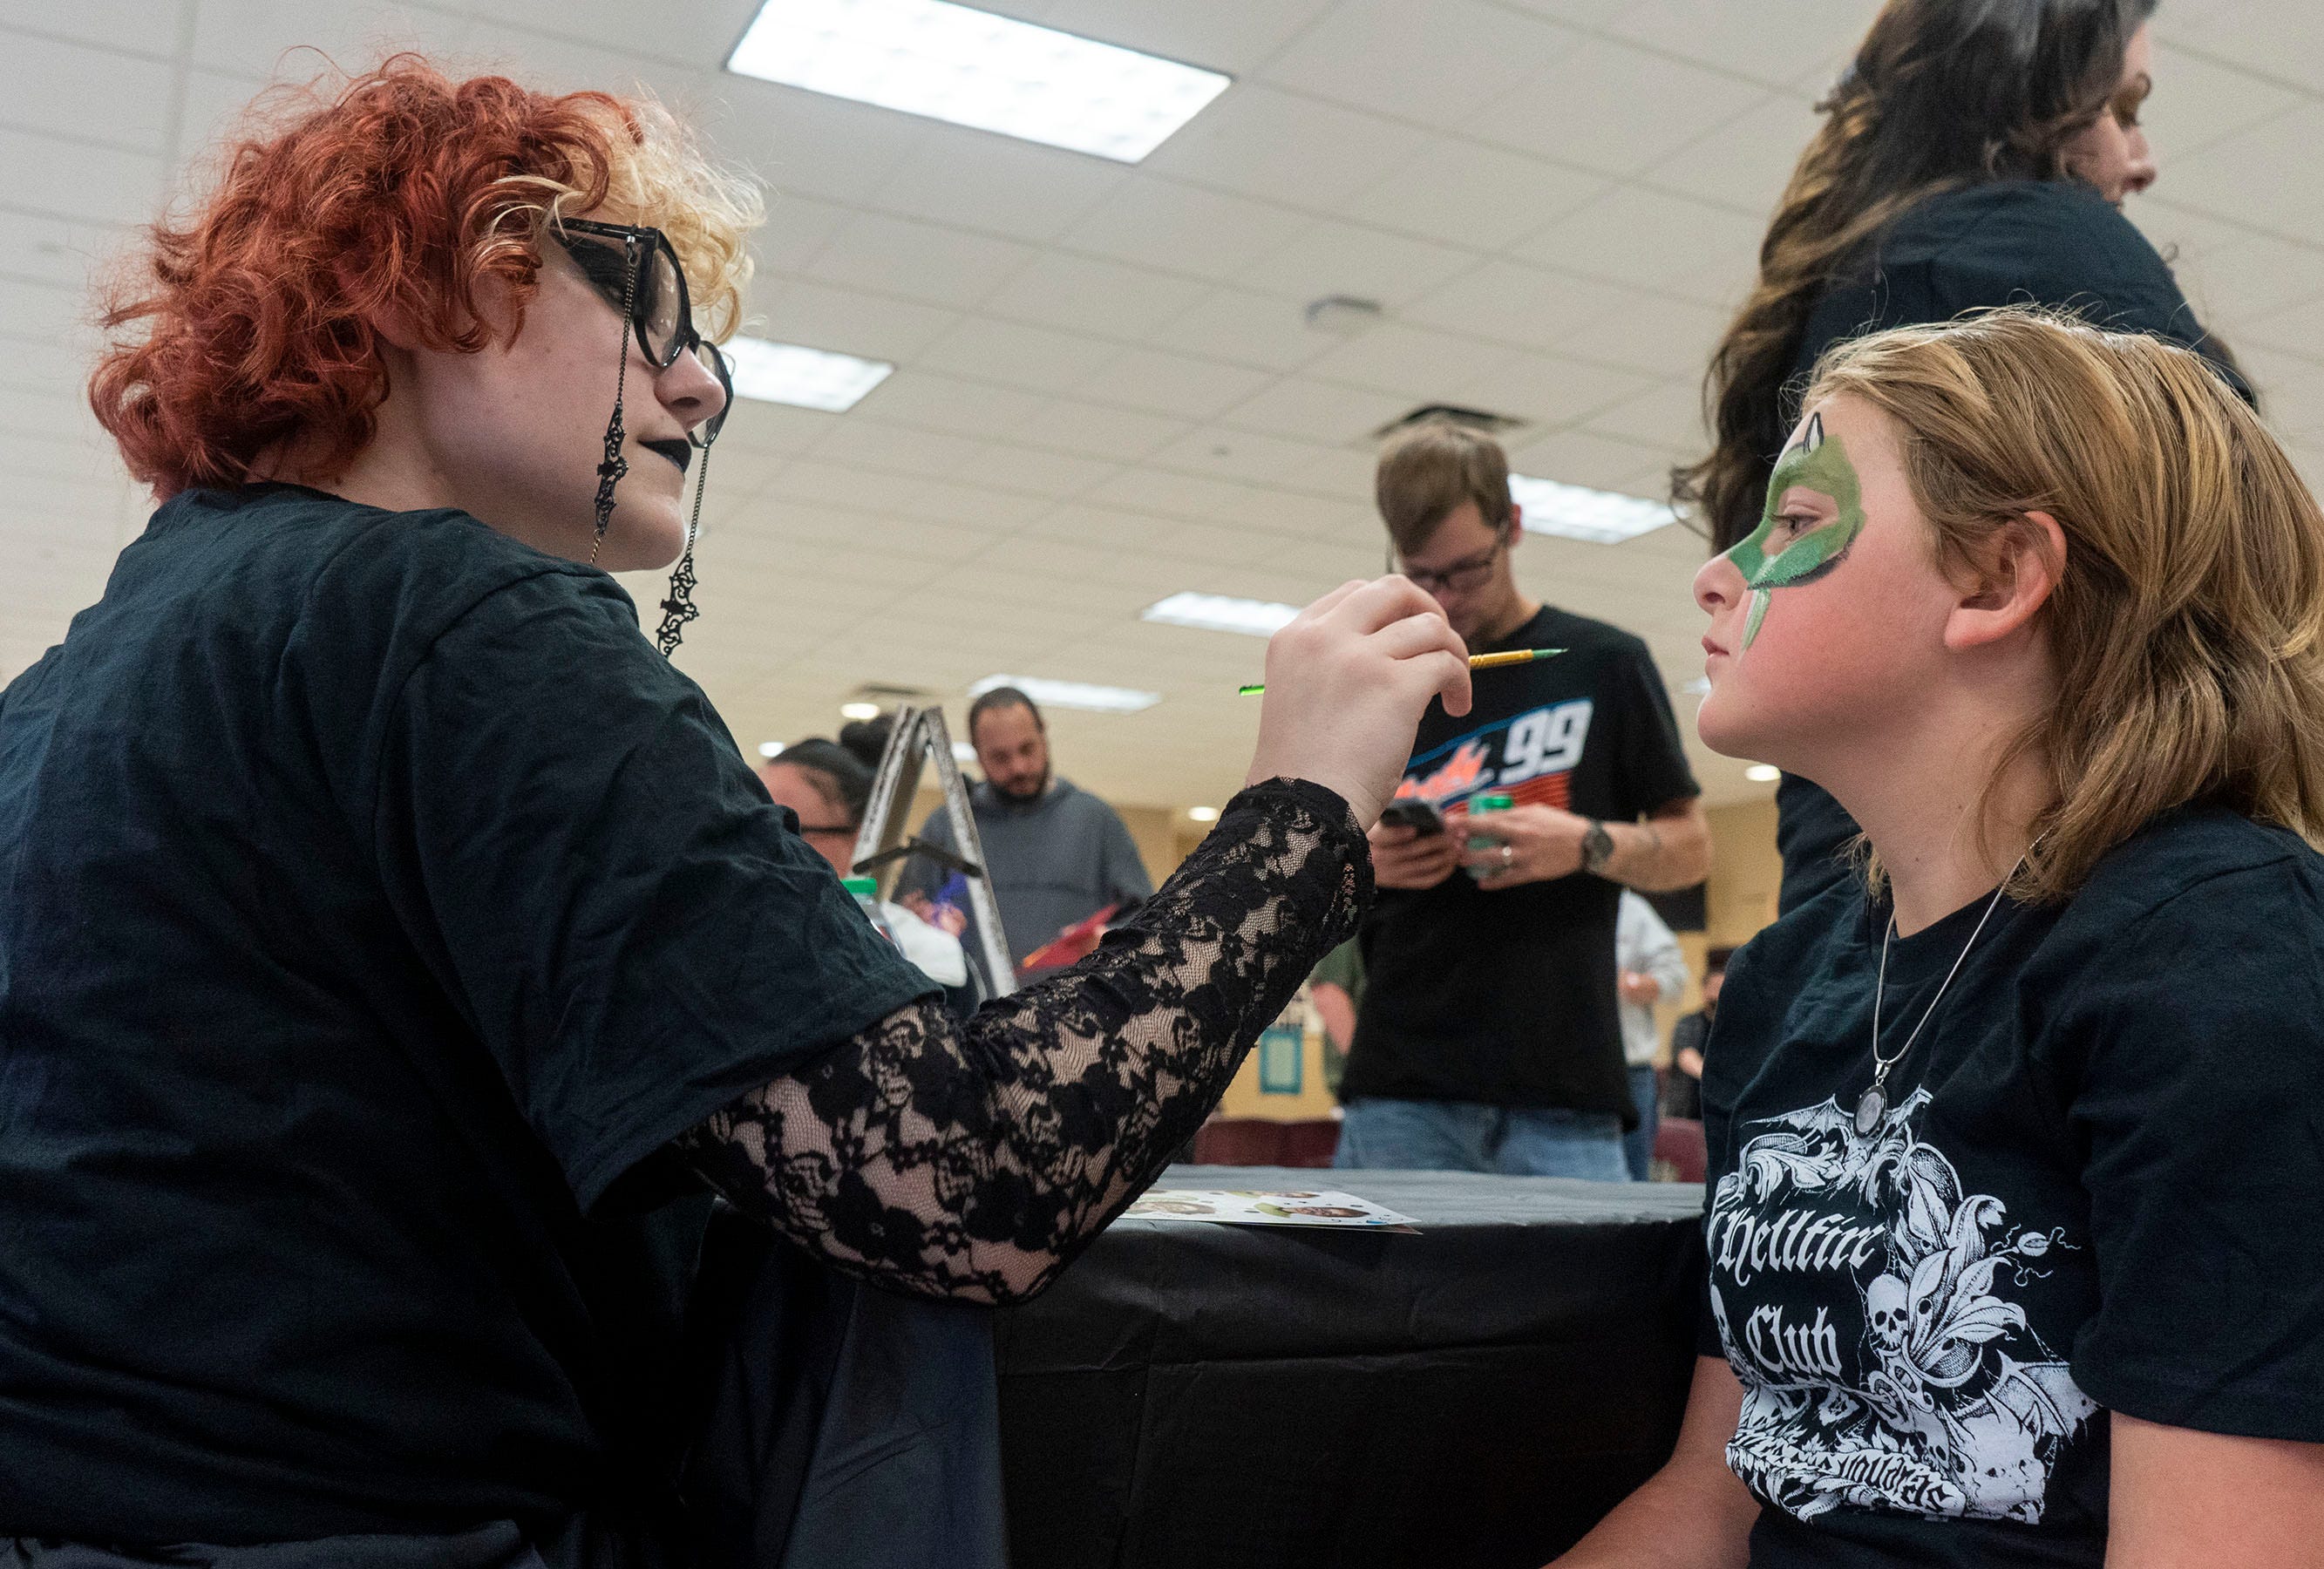 Elizabeth Bradley, on left, from Harleysville, painting Yardley Sipe's face (10), from Marietta, at the Satanic Temple's back to school event at Northern High School in Dillsburg on Saturday, Sept. 24, 2022.